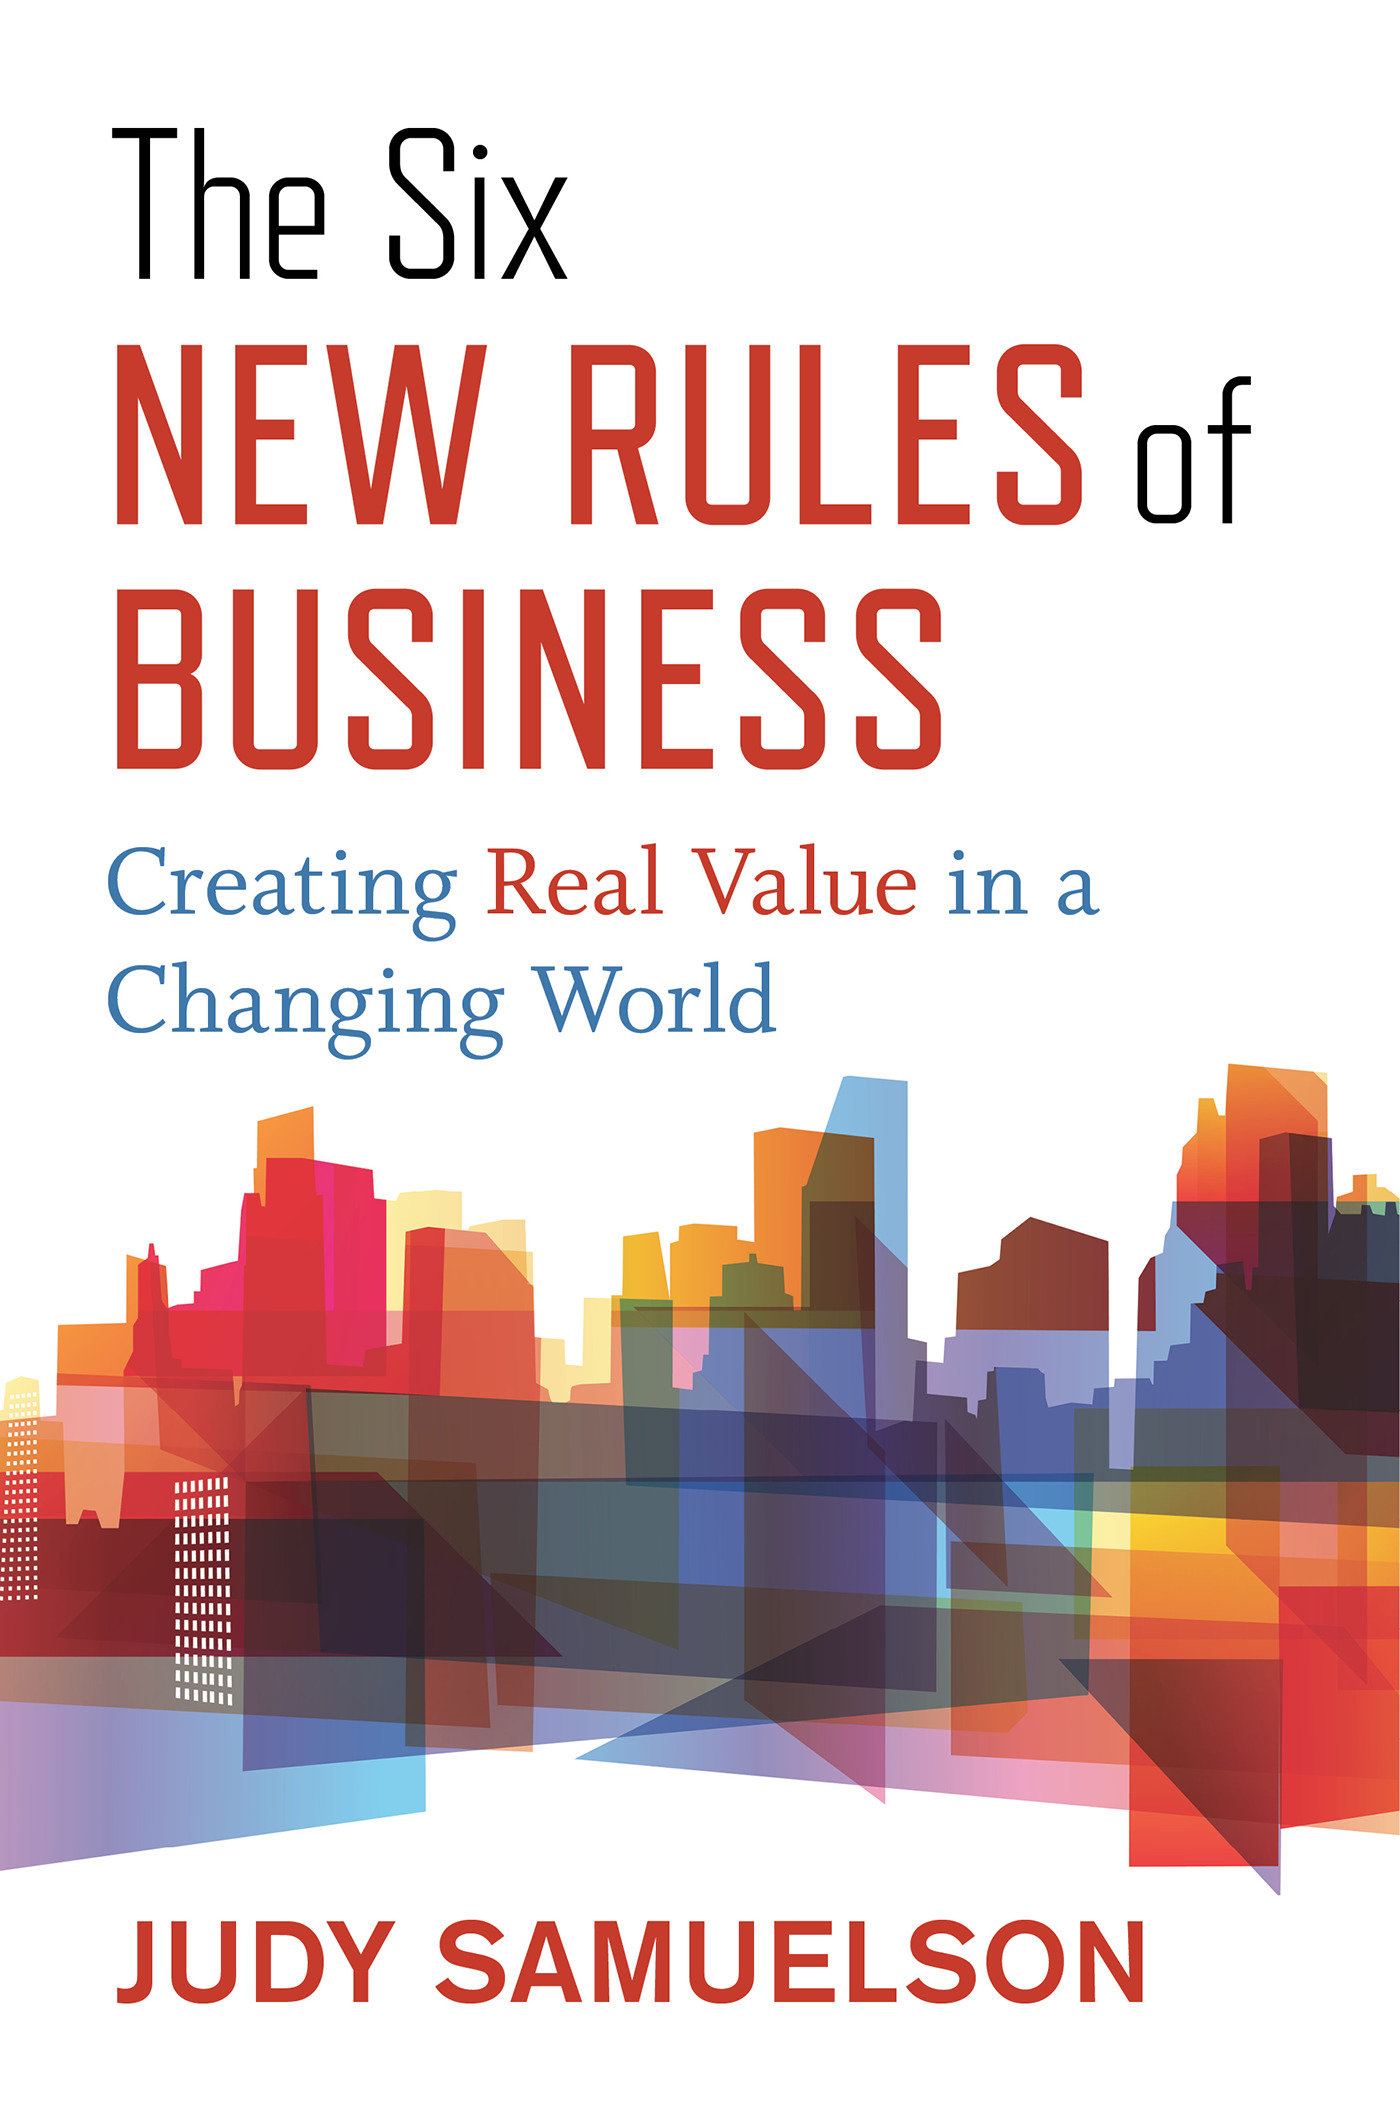 The Six New Rules Of Business (Hardcover Book)